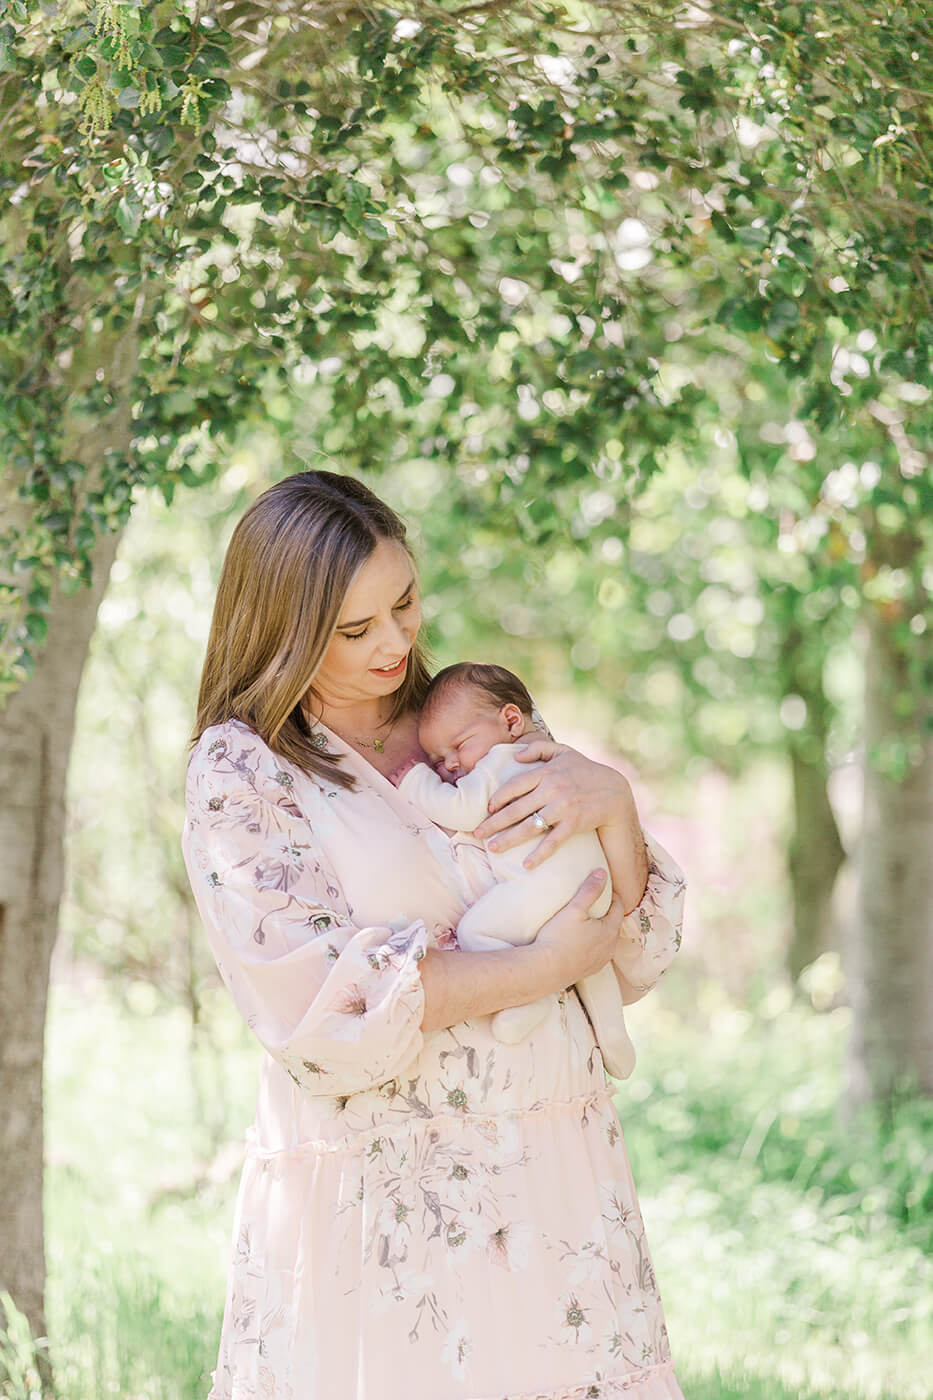 Newborn photos outside by tree